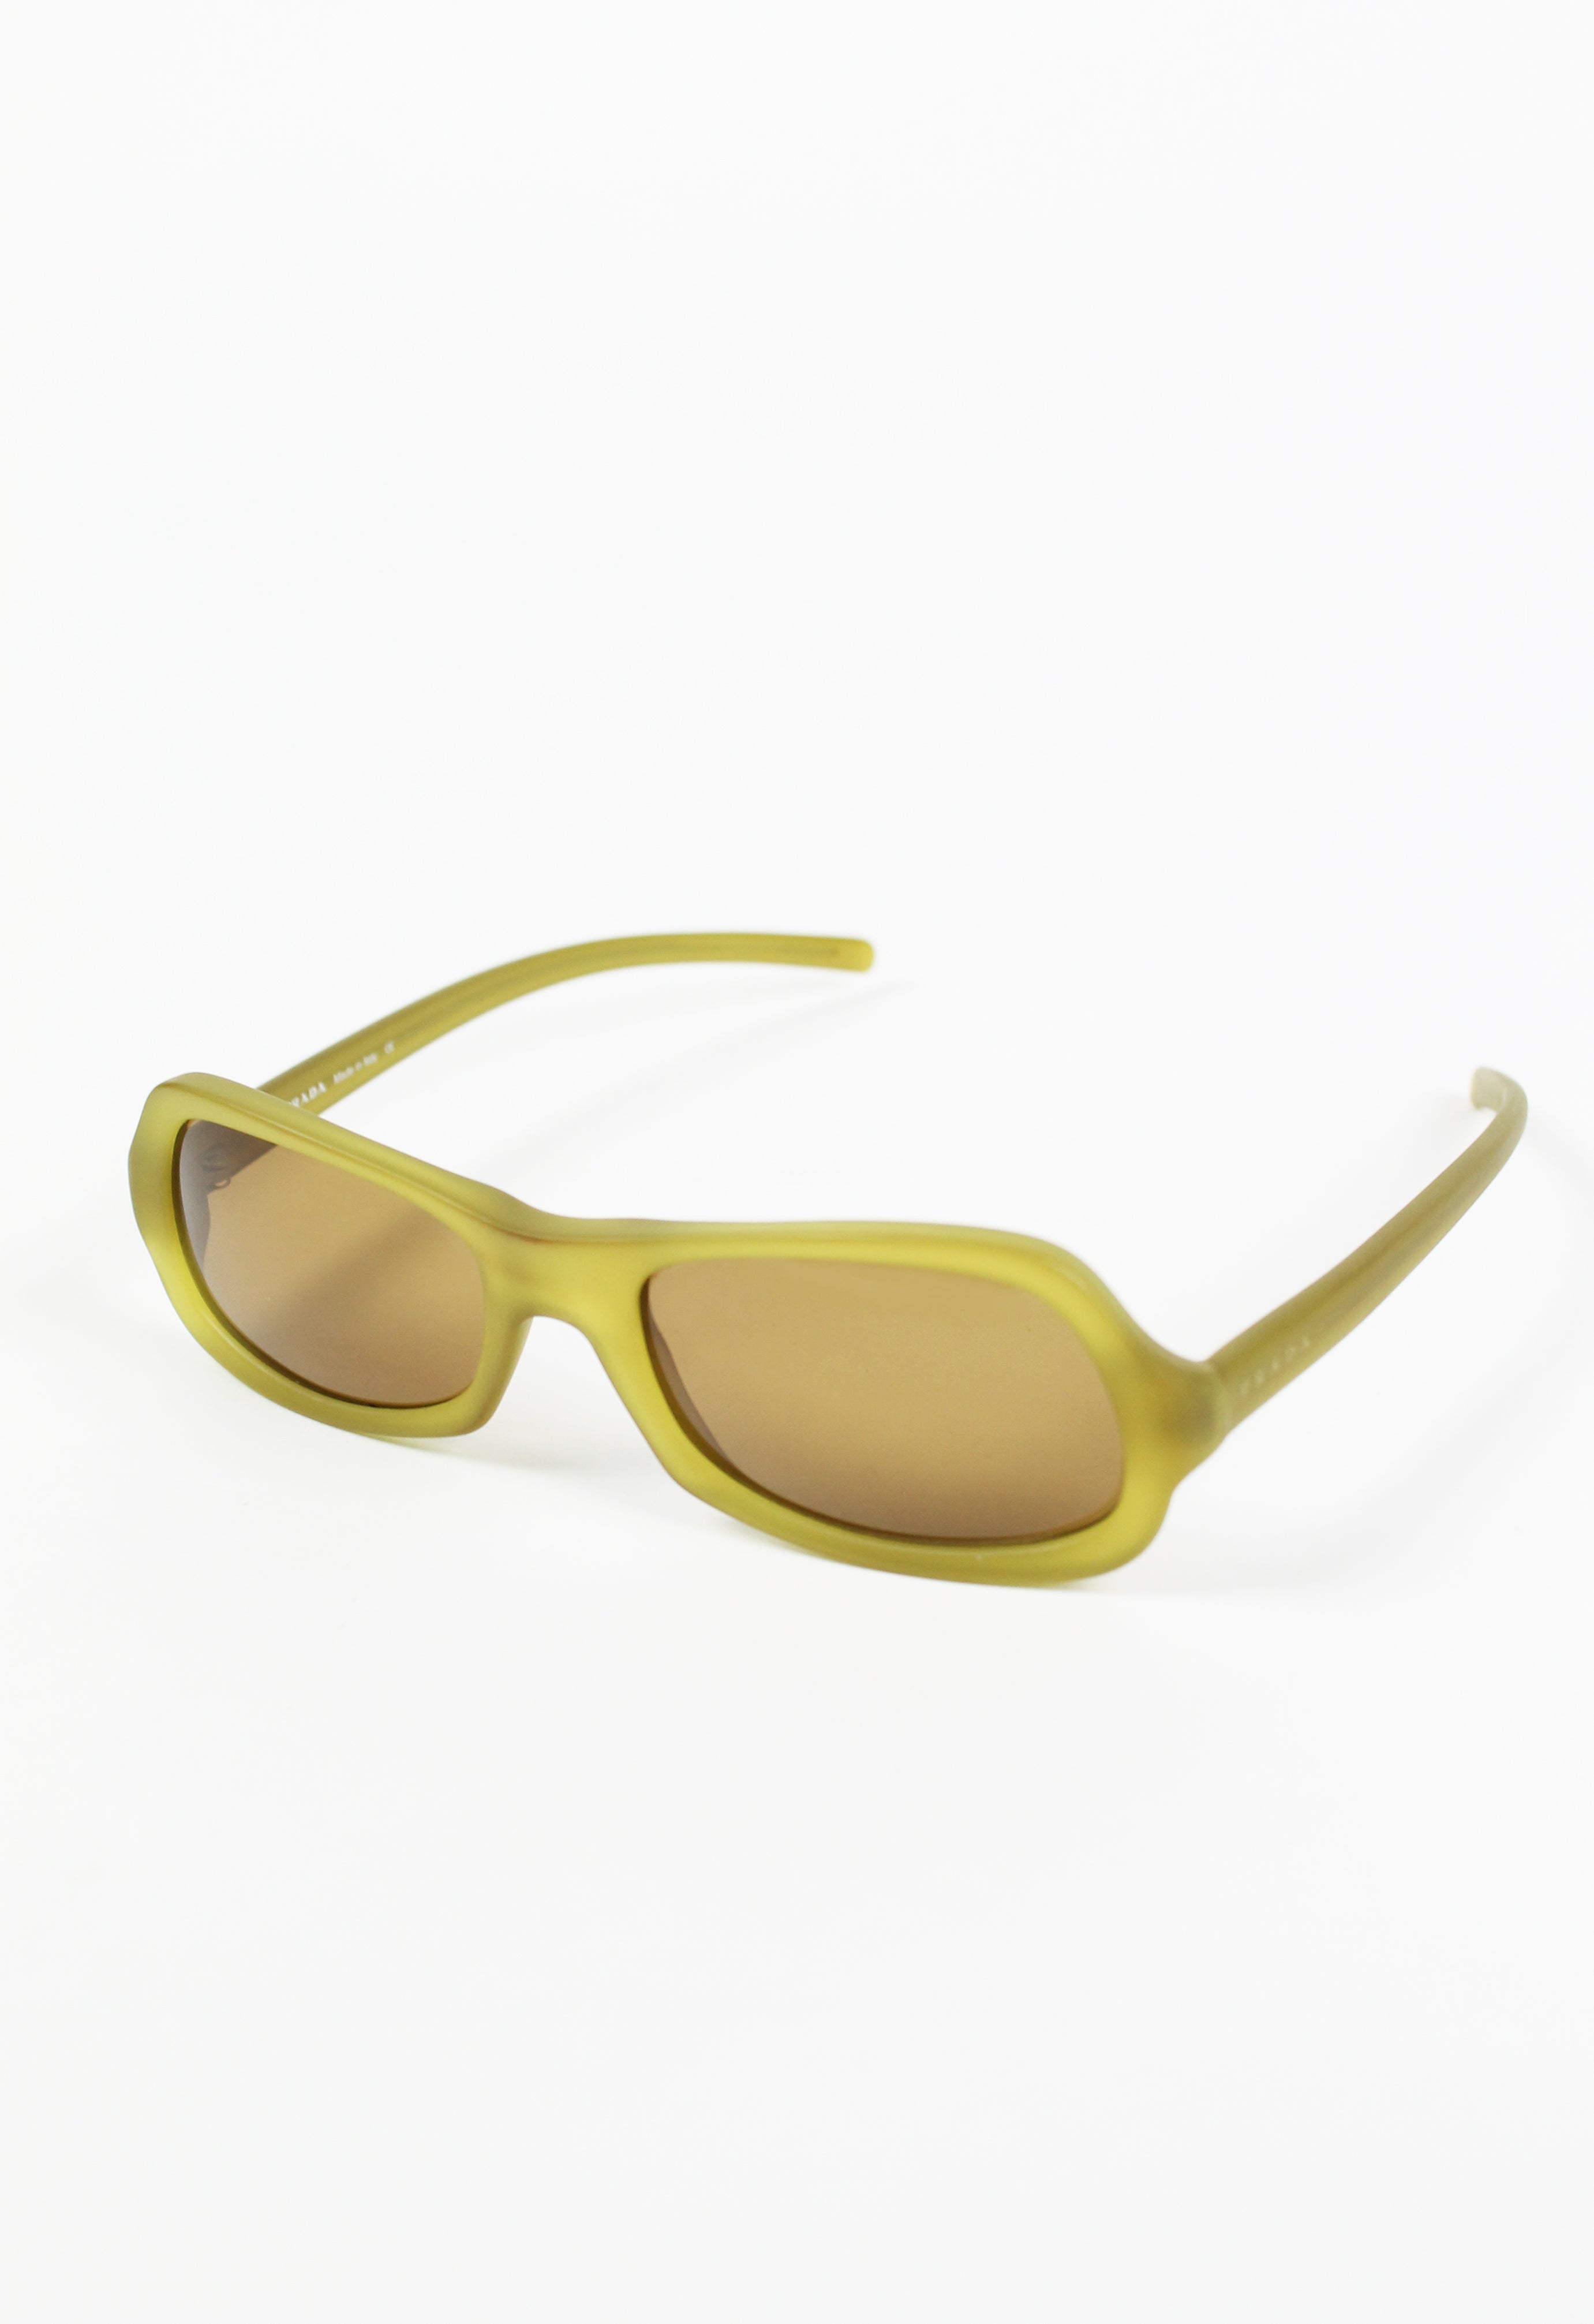 PRADA SS 2000 FROSTED SUNGLASSES – THE 543